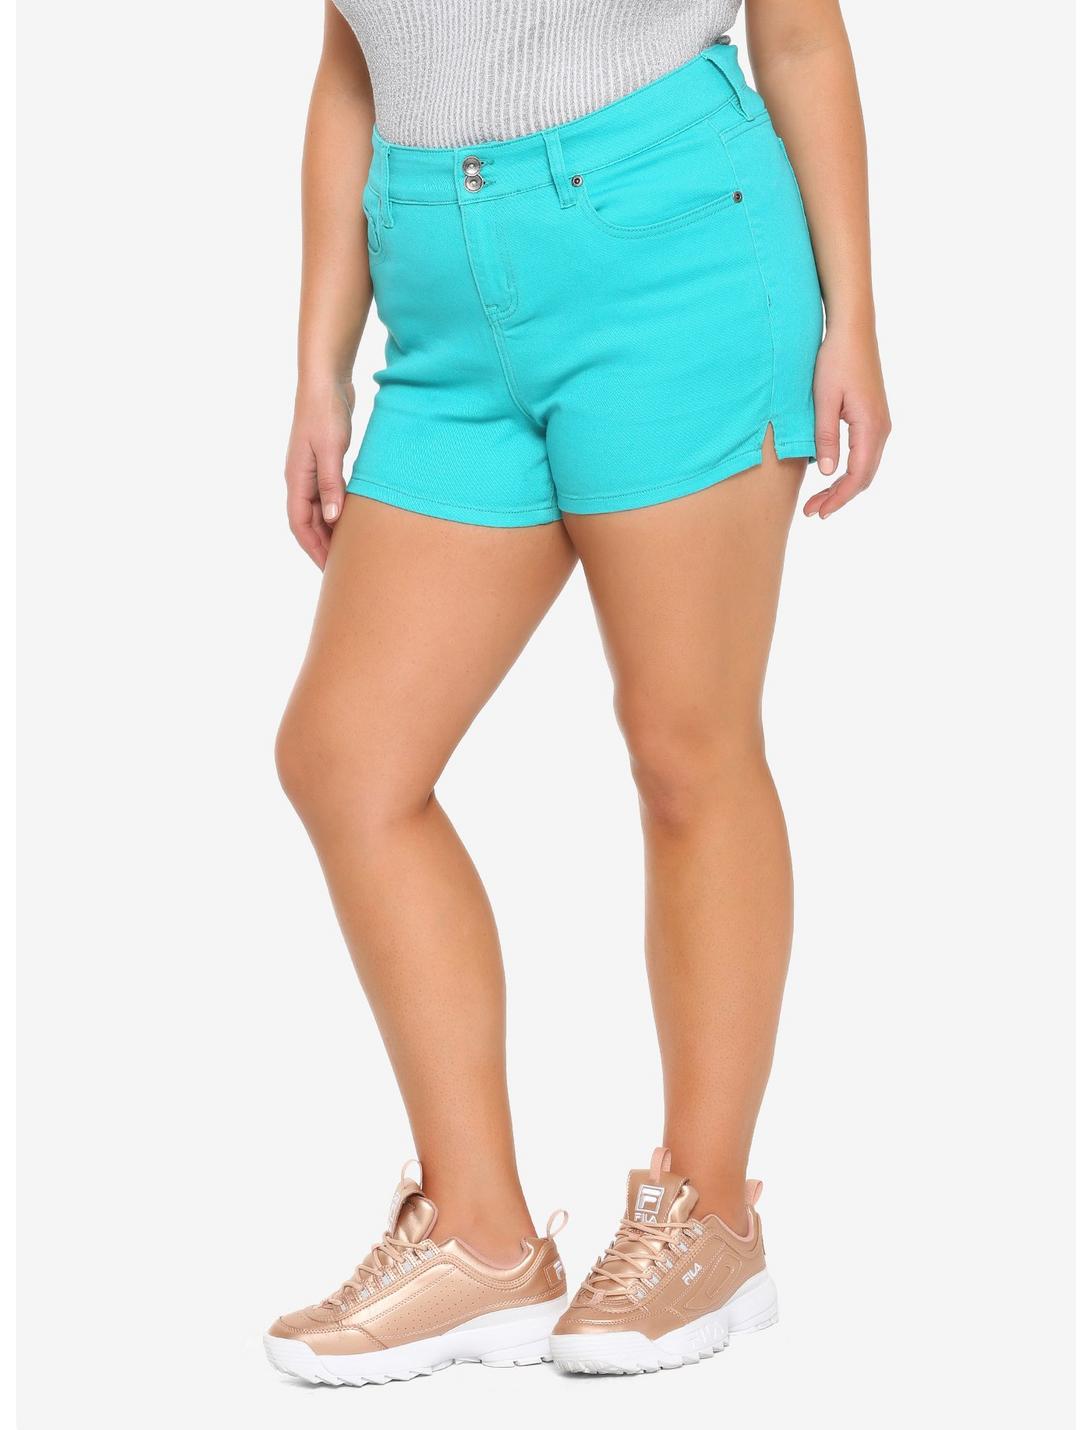 Turquoise Hi-Rise Skinny Shorts With Slits Plus Size, TEAL, hi-res